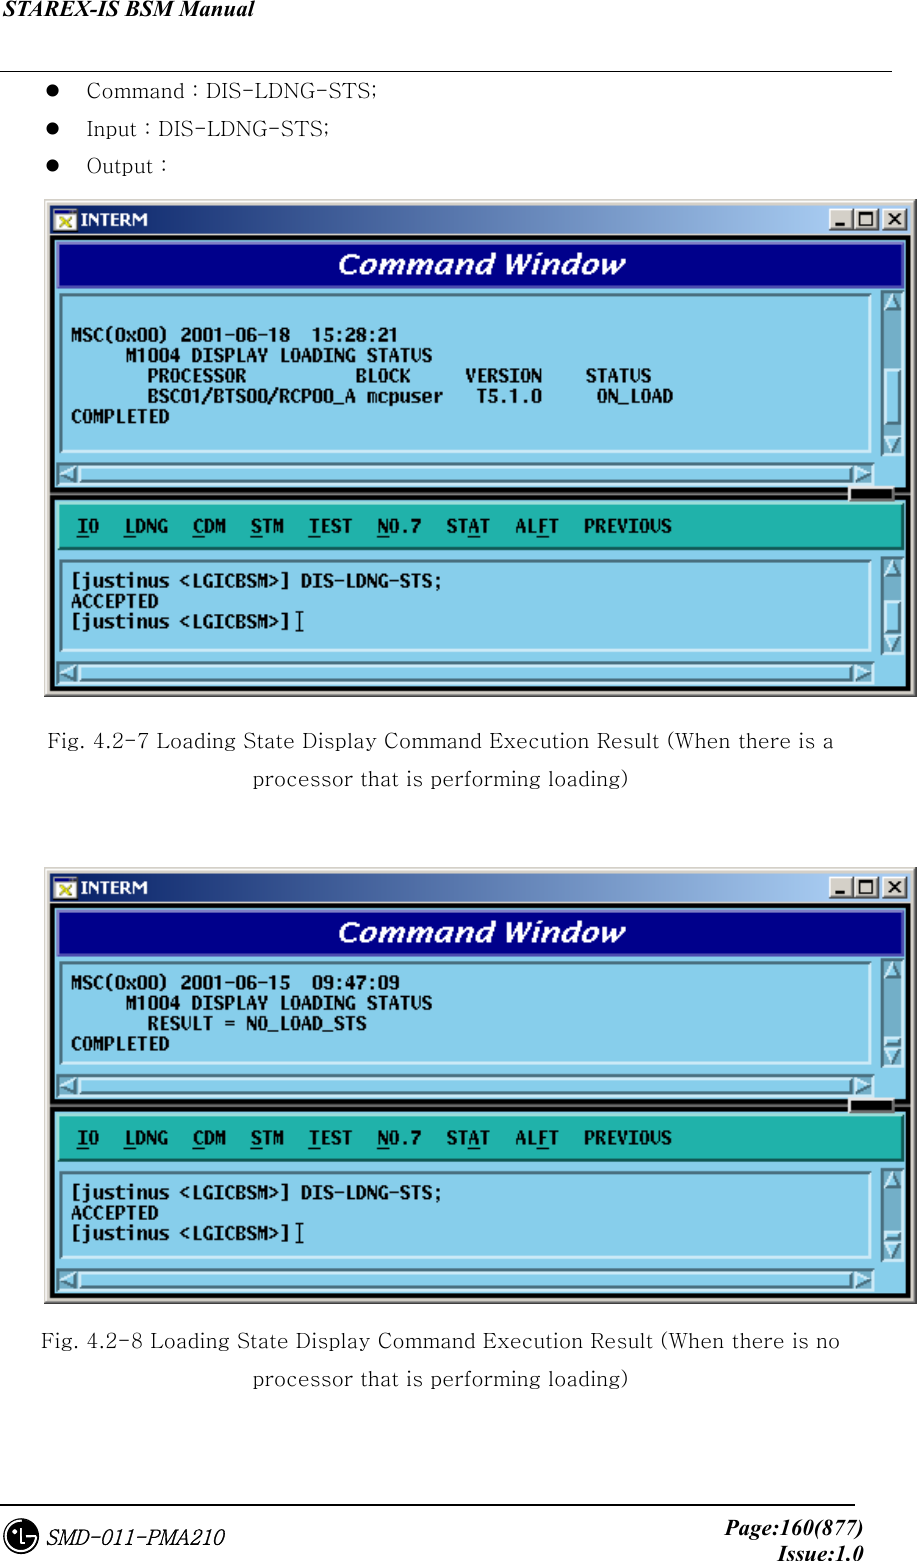 STAREX-IS BSM Manual     Page:160(877)Issue:1.0SMD-011-PMA210   Command : DIS-LDNG-STS;   Input : DIS-LDNG-STS;   Output :    Fig. 4.2-7 Loading State Display Command Execution Result (When there is a processor that is performing loading)   Fig. 4.2-8 Loading State Display Command Execution Result (When there is no processor that is performing loading)  